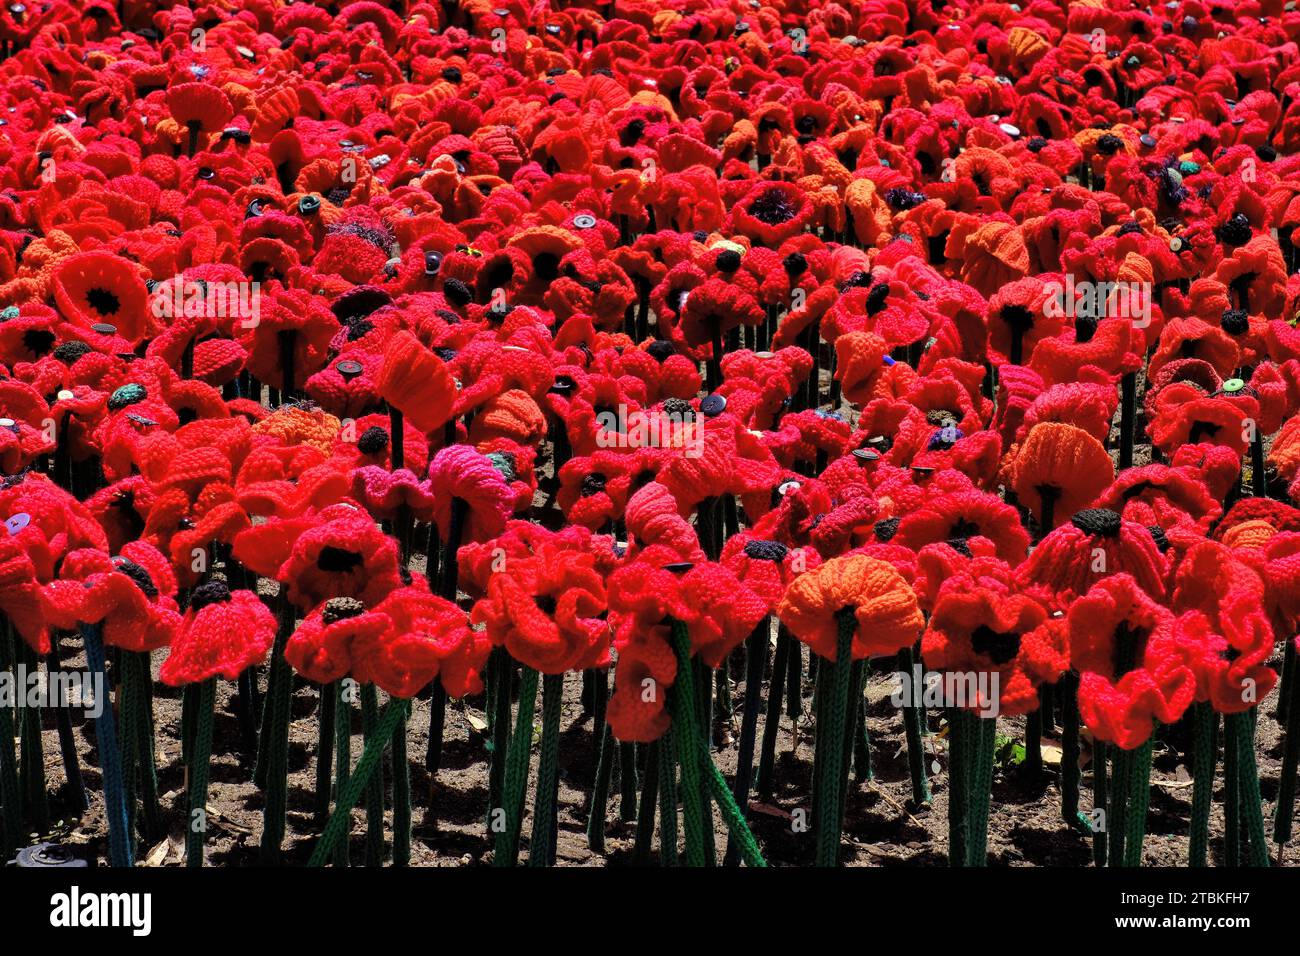 Perth: Mass of colourful red knitted poppies at State War Memorial for Remembrance Day, Kings Park, Perth, Western Australia Stock Photo